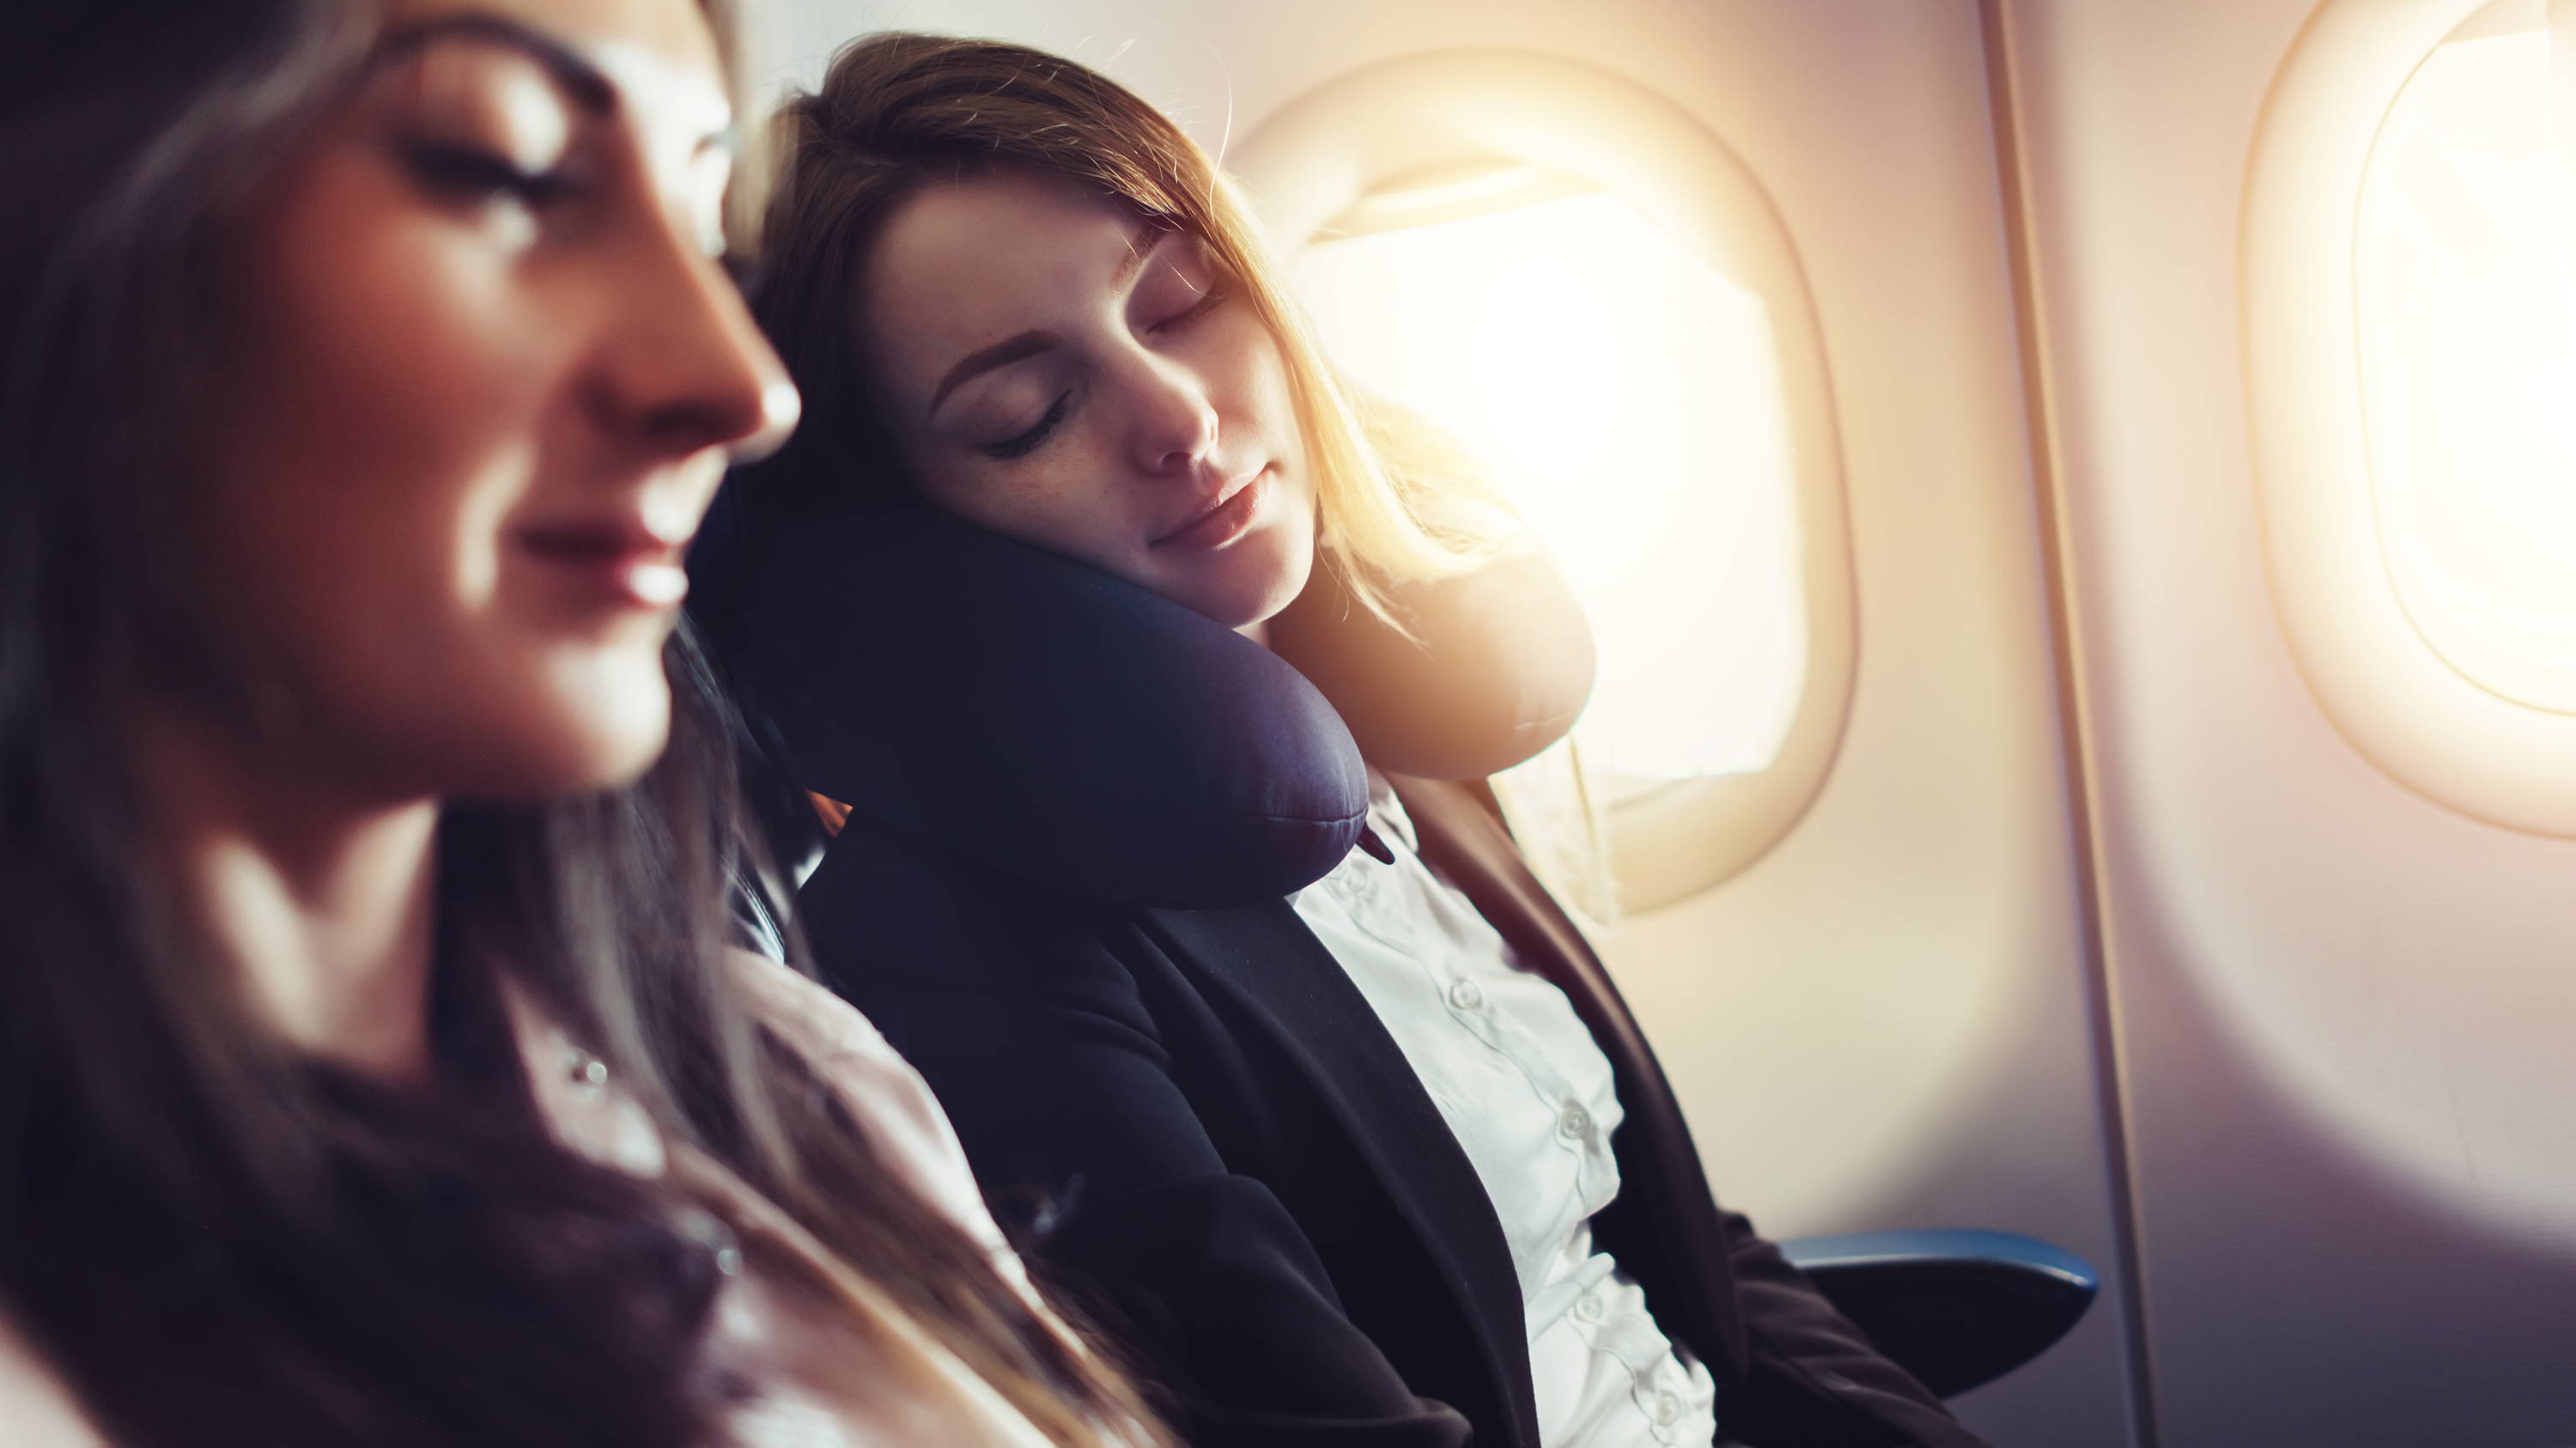 Woman sleeping with neck pillow in an airplane